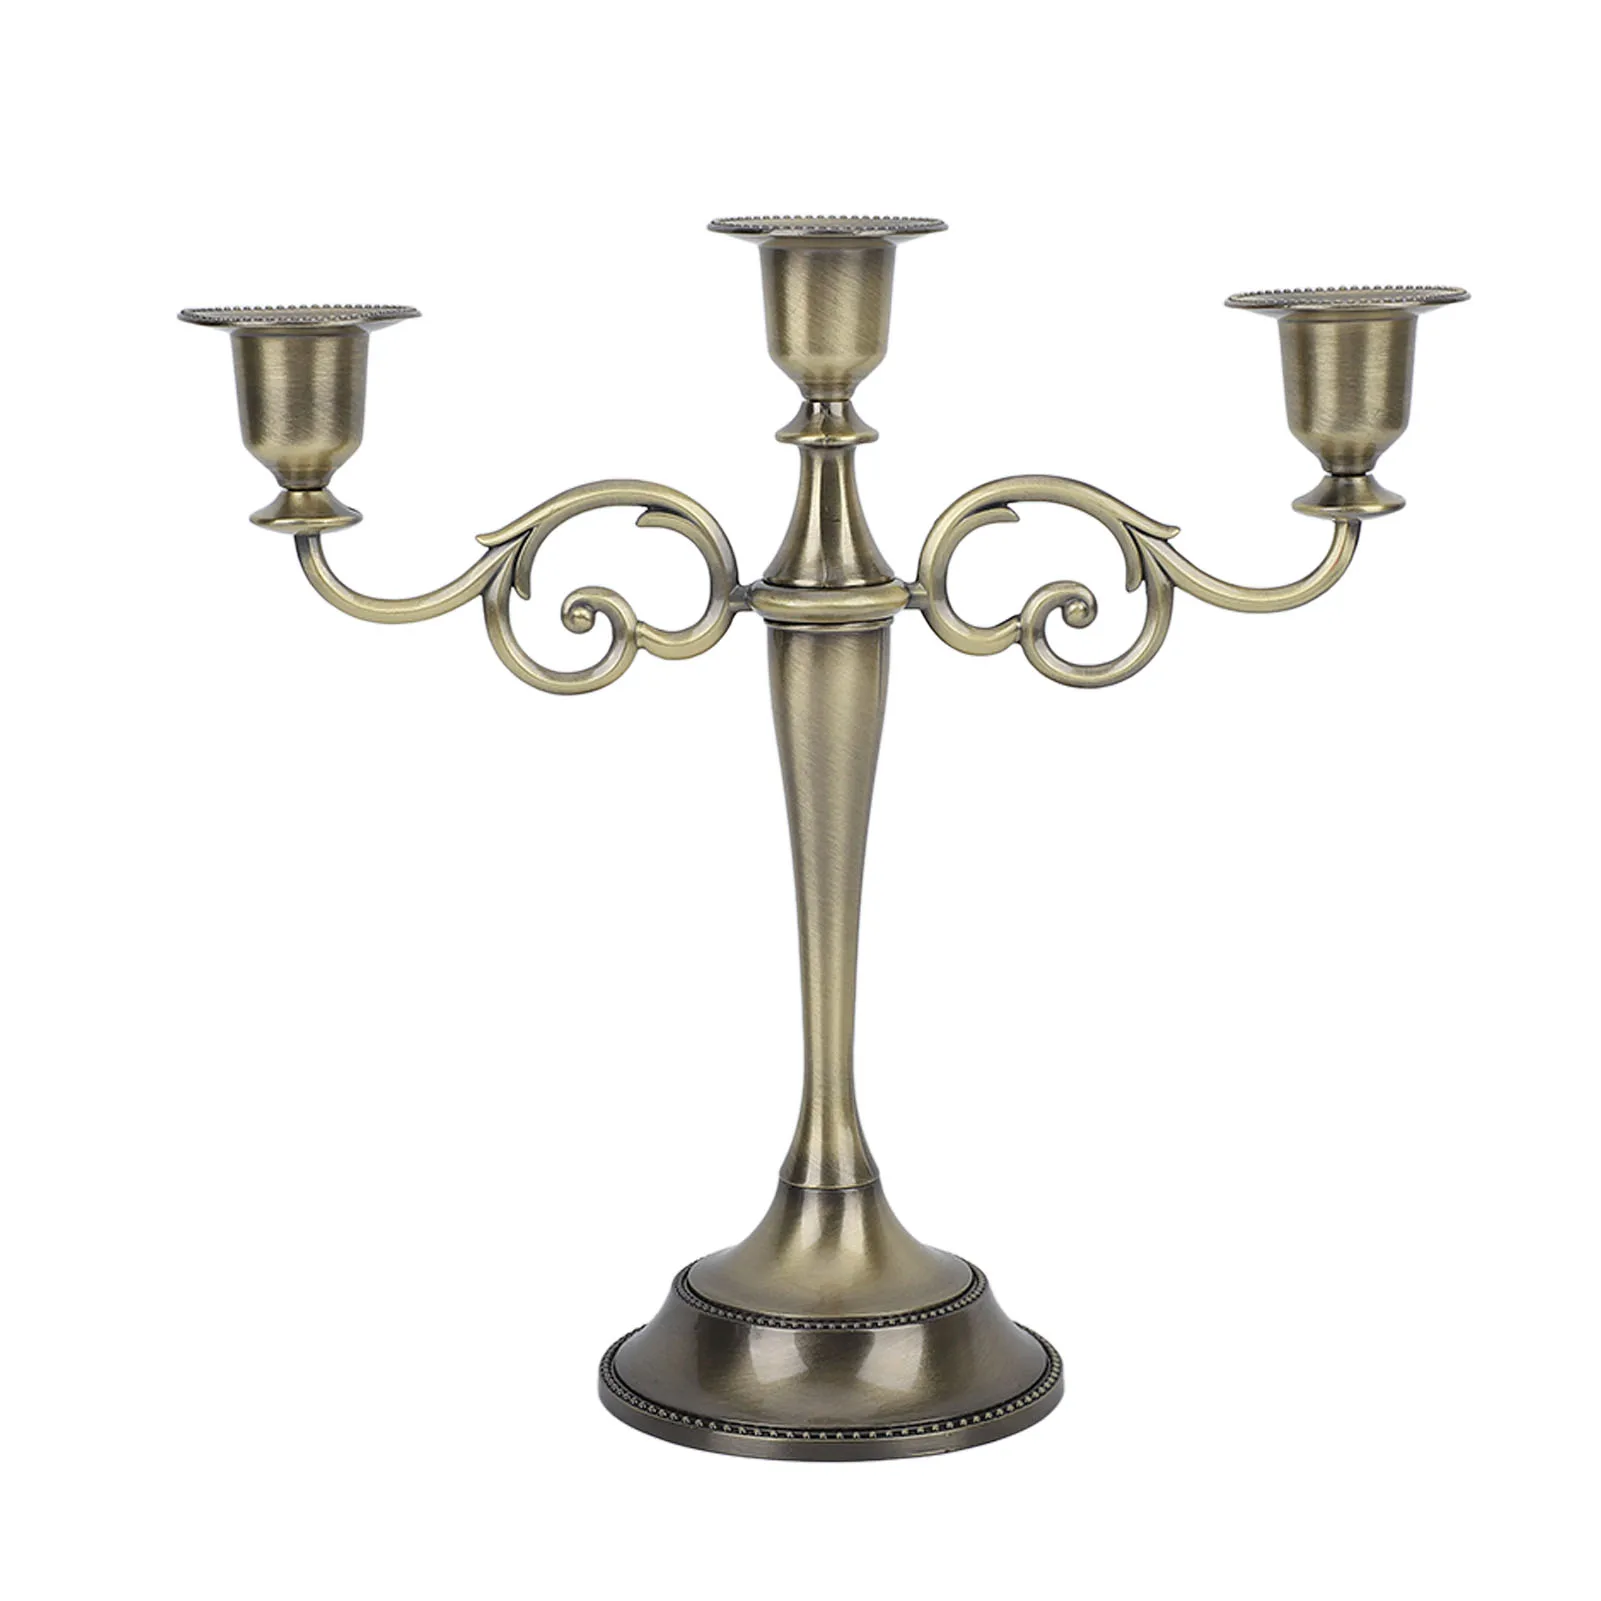 

Retro Metal Candle Holder 3 Arms High Gloss Retro Exquisite Candlestick Holder For Dining Tables Wedding Decoration